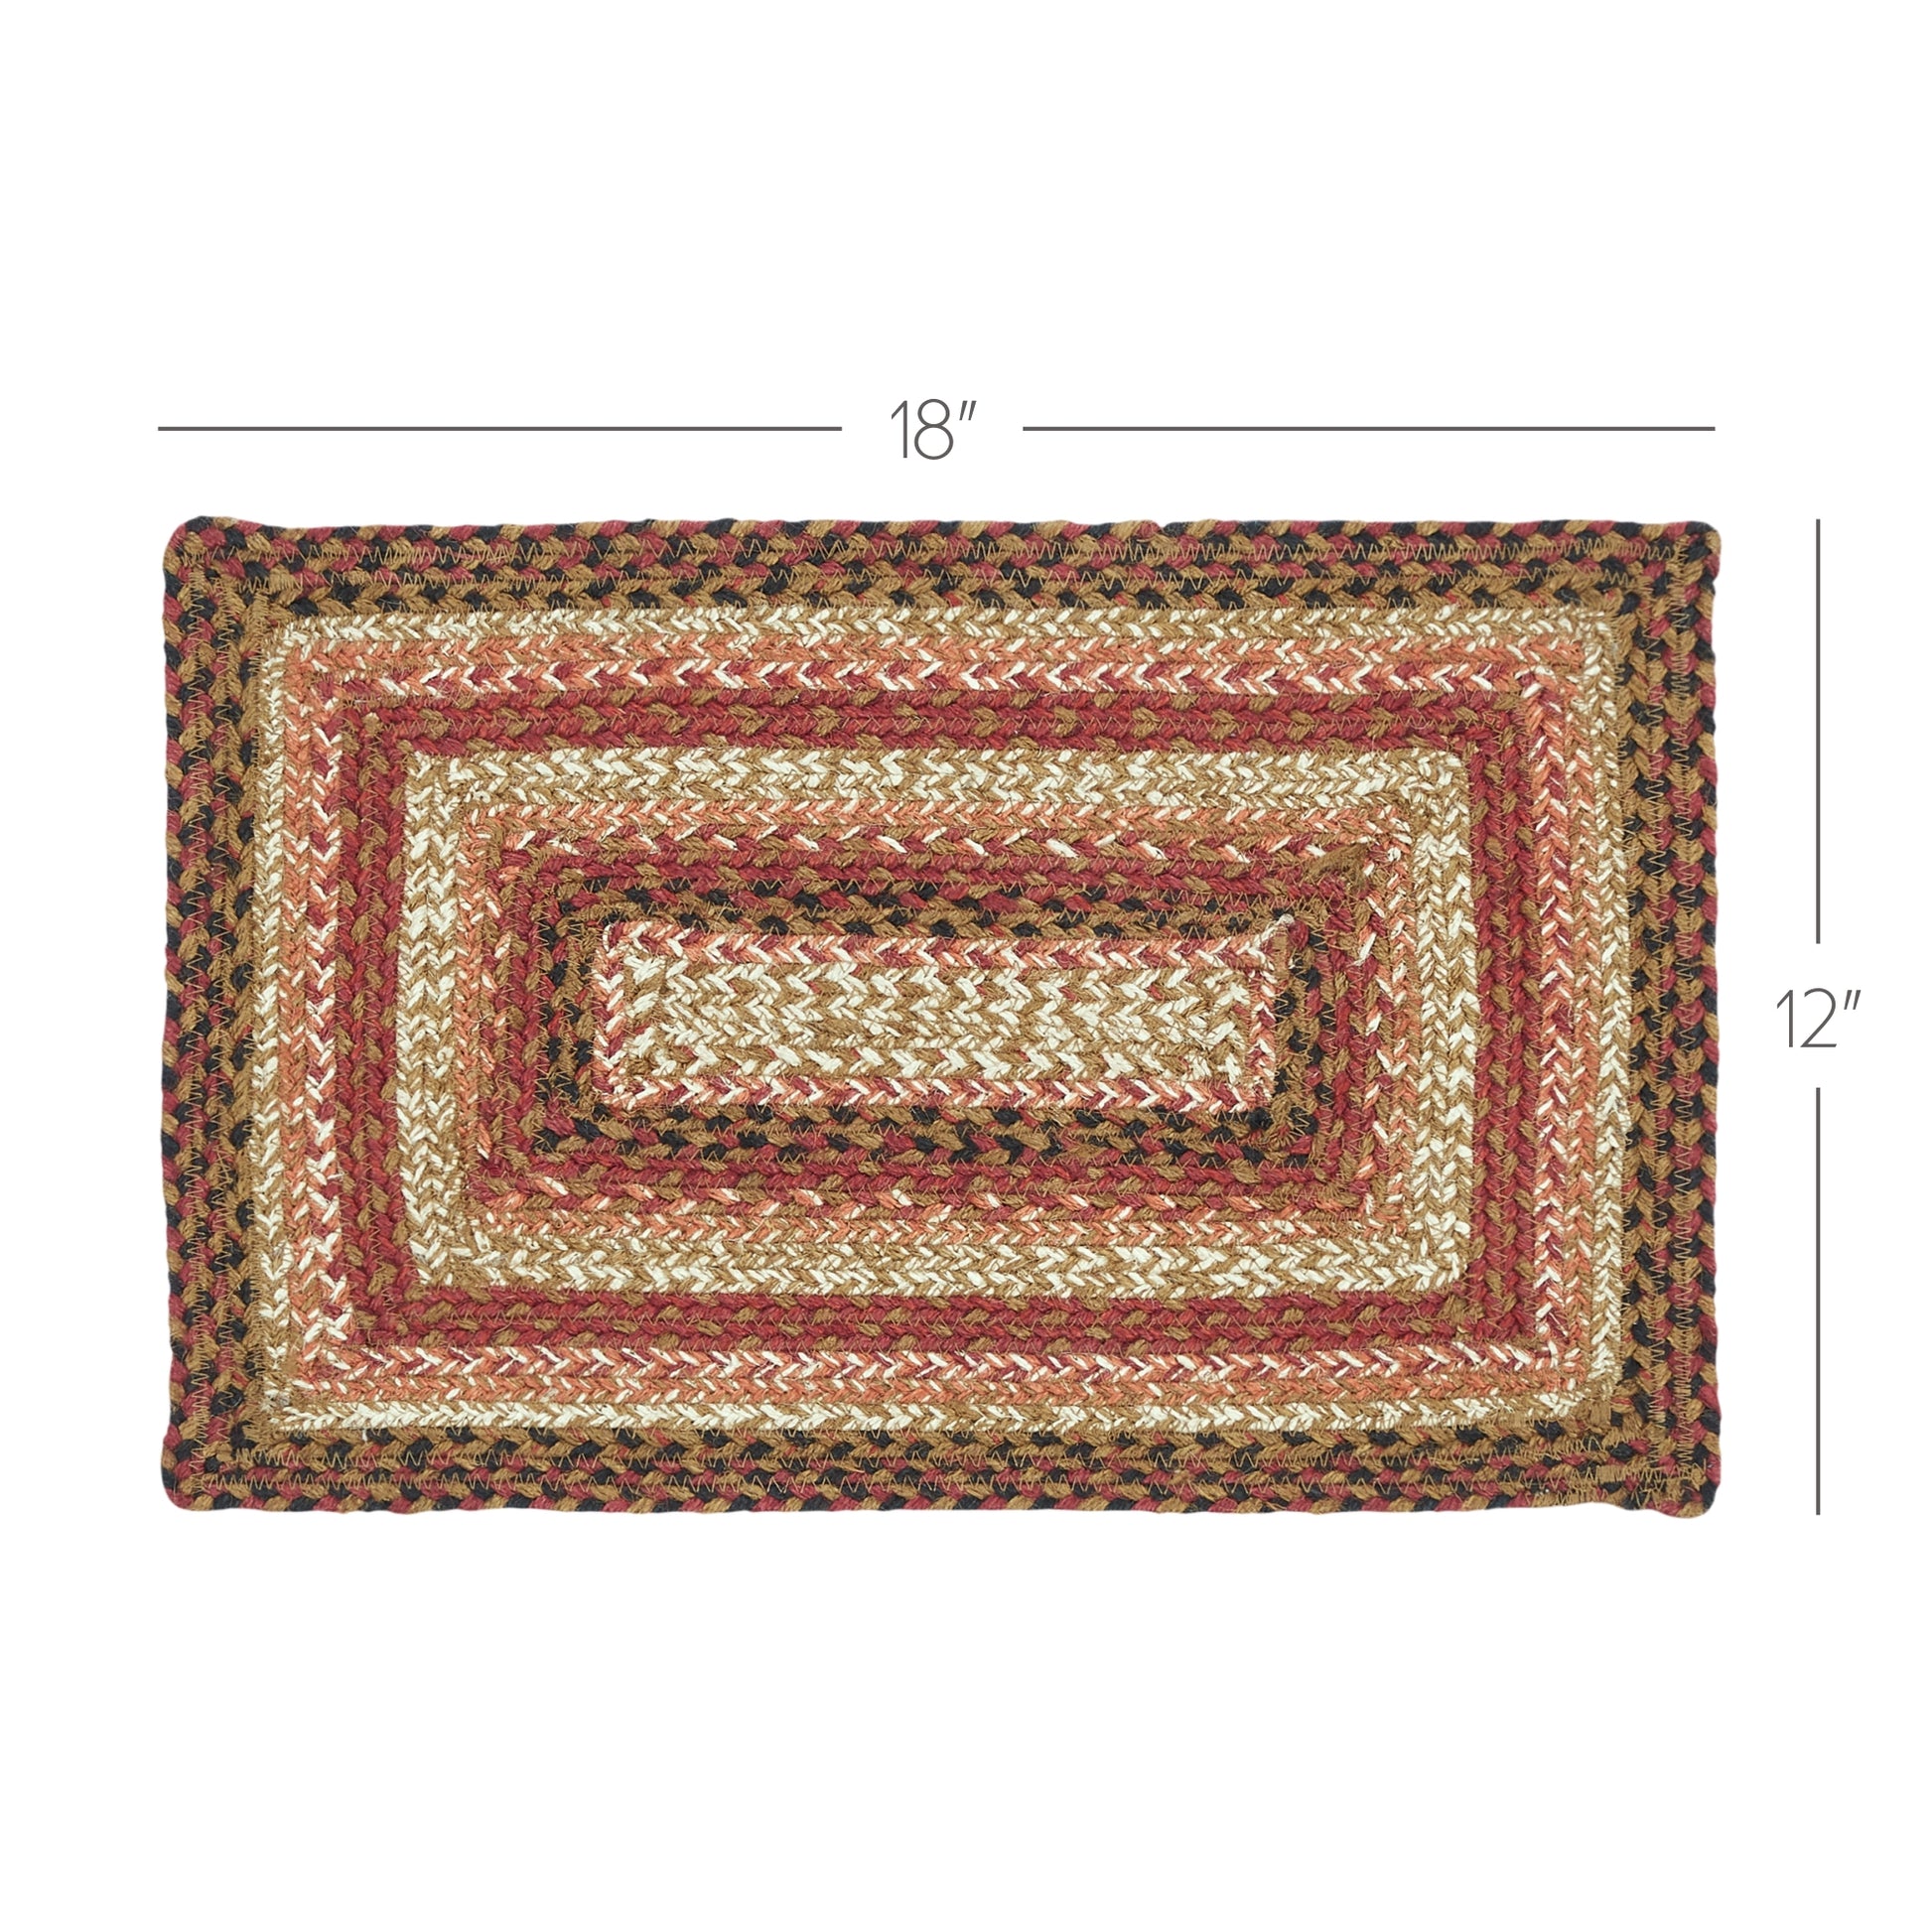 67129-Ginger-Spice-Jute-Rect-Placemat-12x18-image-1